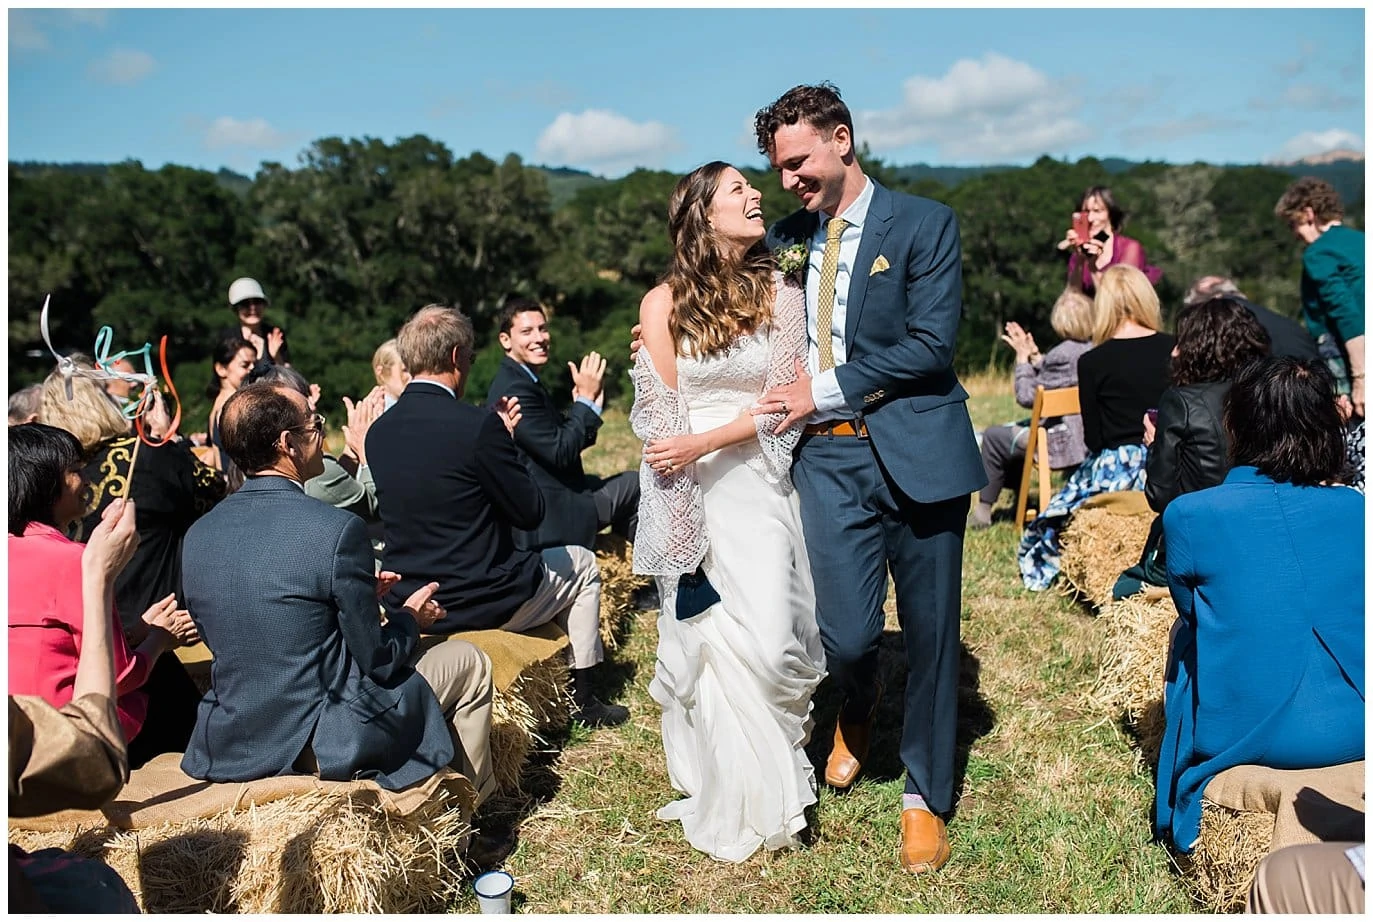 bride and groom walk back down the aisle after wedding ceremony at Mann Family Farm wedding by California wedding photographer Jennie Crate